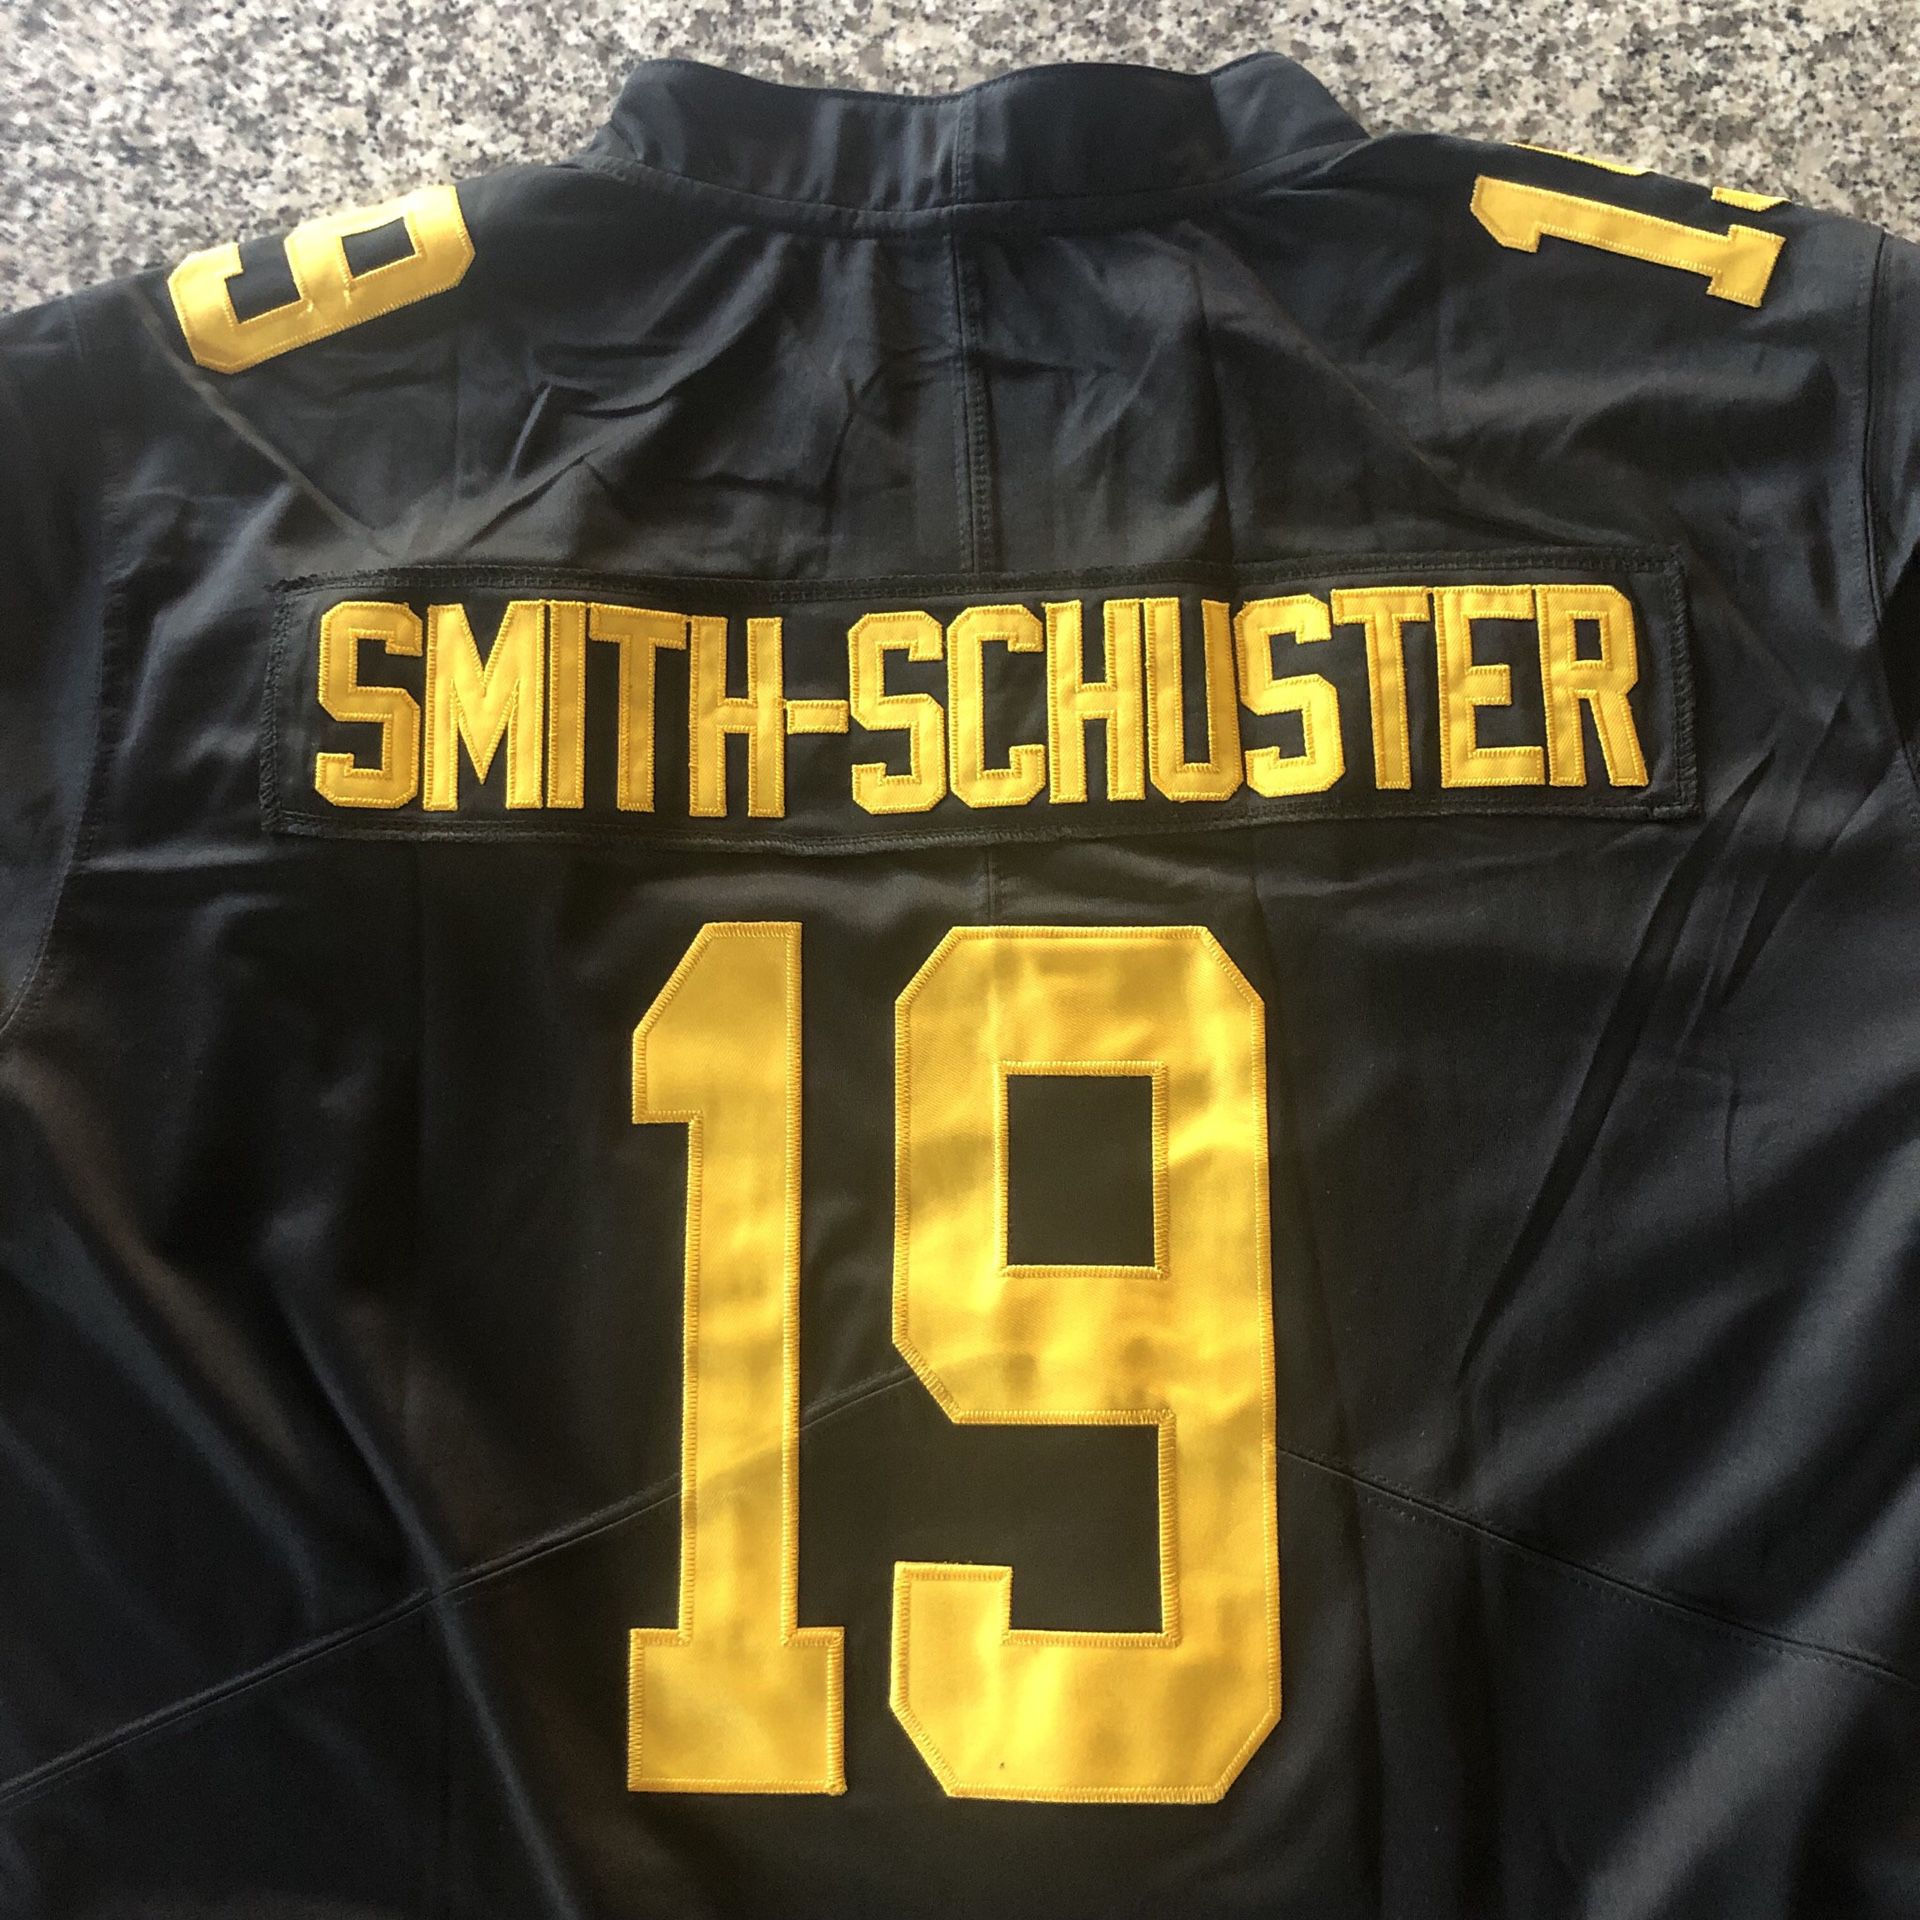 🔥 BRAND NEW! 🔥 JuJu Smith-Schuster #19 Steelers Nike Color Rush Jersey + Size MEDIUM or LARGE + SHIPS OUT TODAY! 📦💨